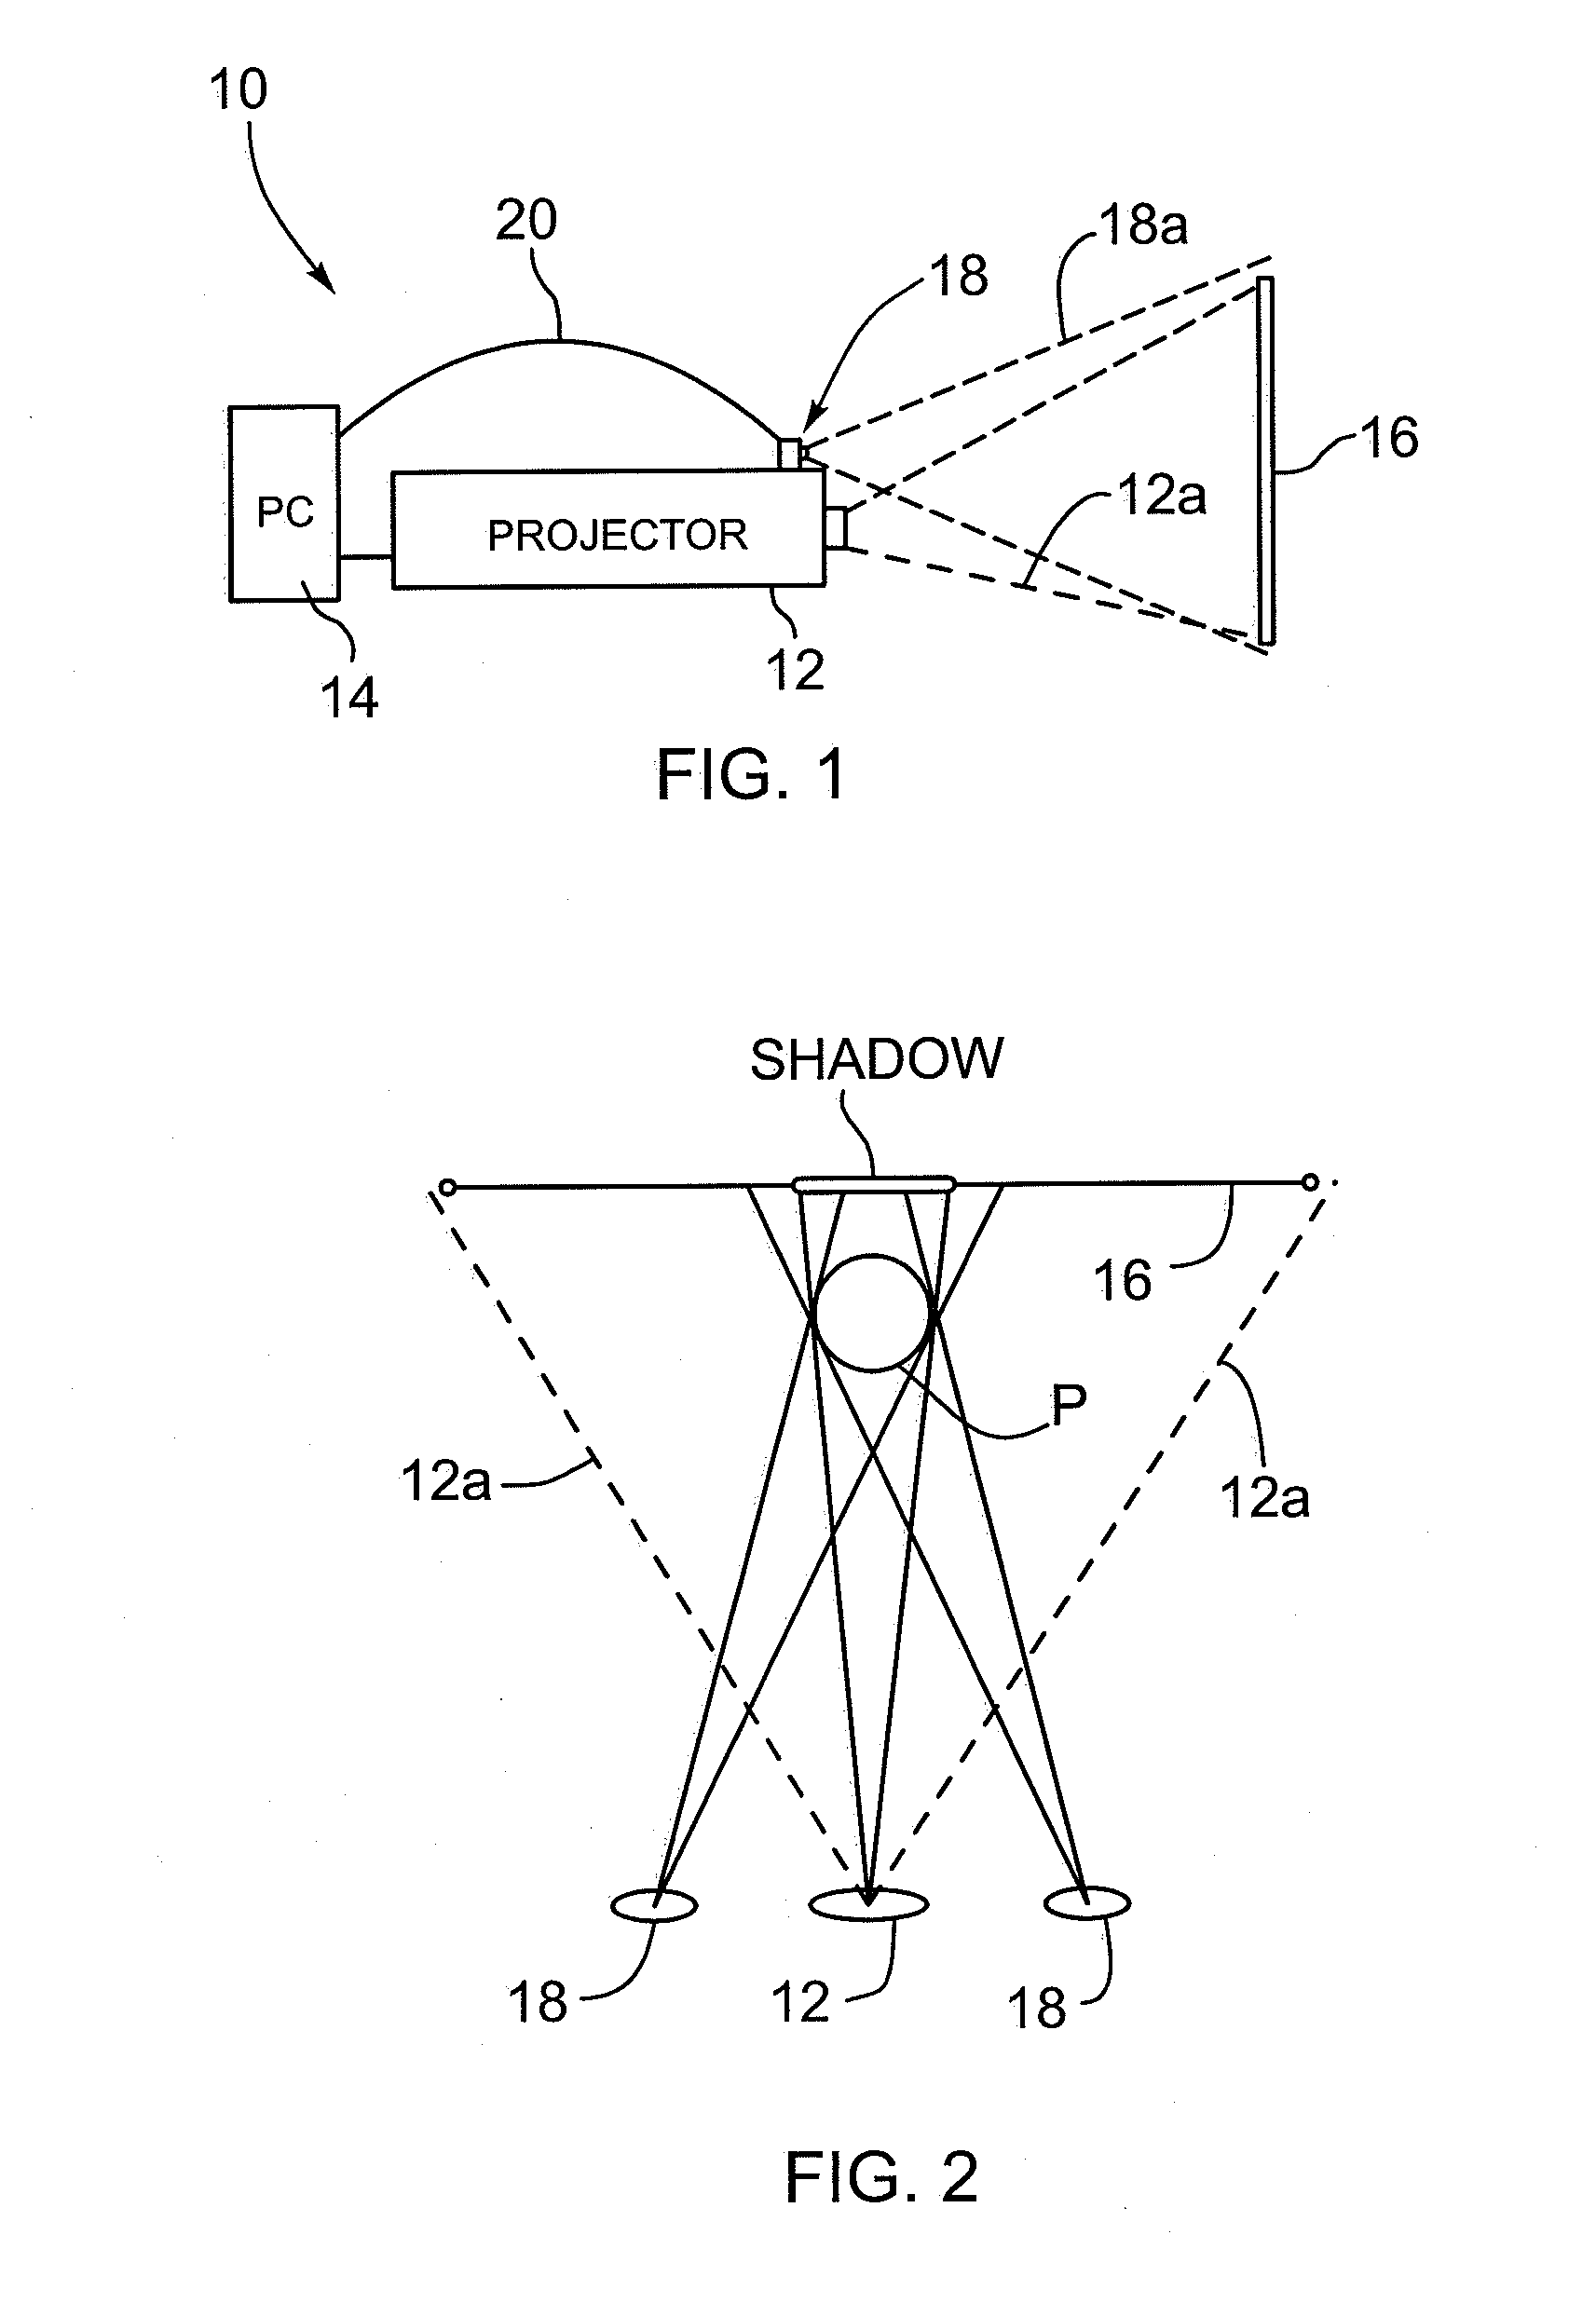 Method and apparatus for inhibiting a subject's eyes from being exposed to projected light